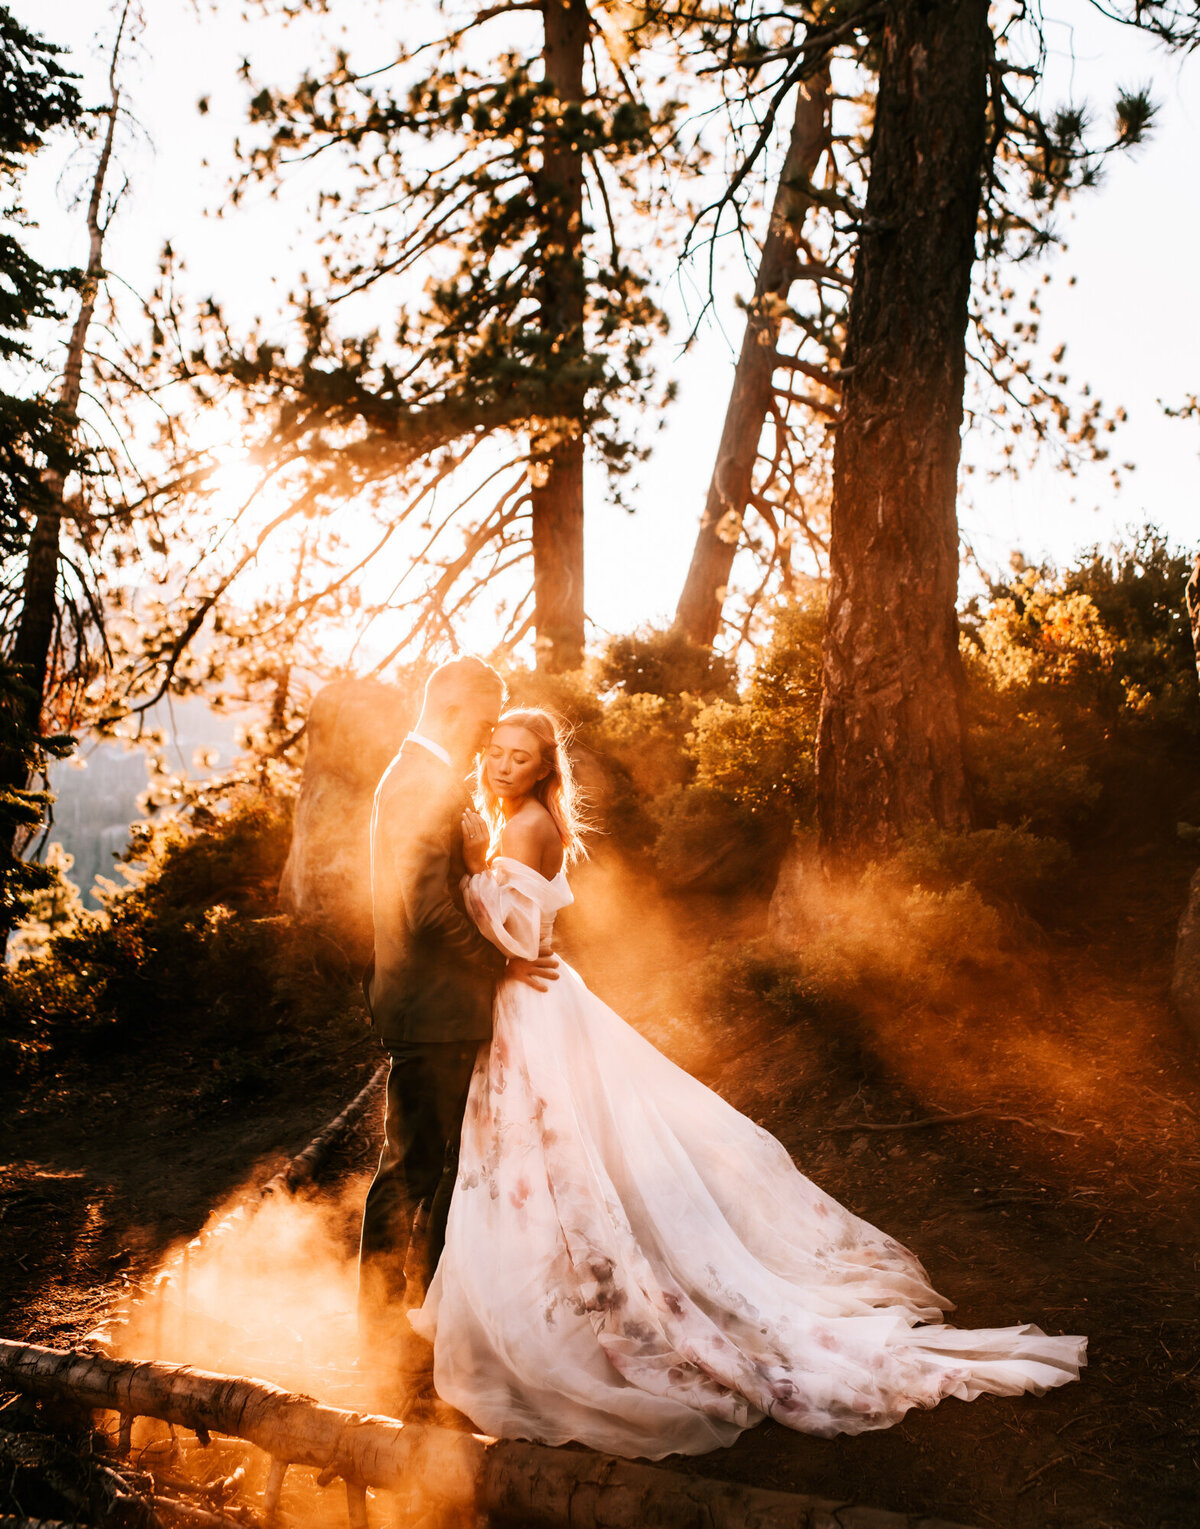 Couples Photography, Man in a blue suit holds woman in a wedding dress in the golden sun as dust clouds are kicked up all around them.